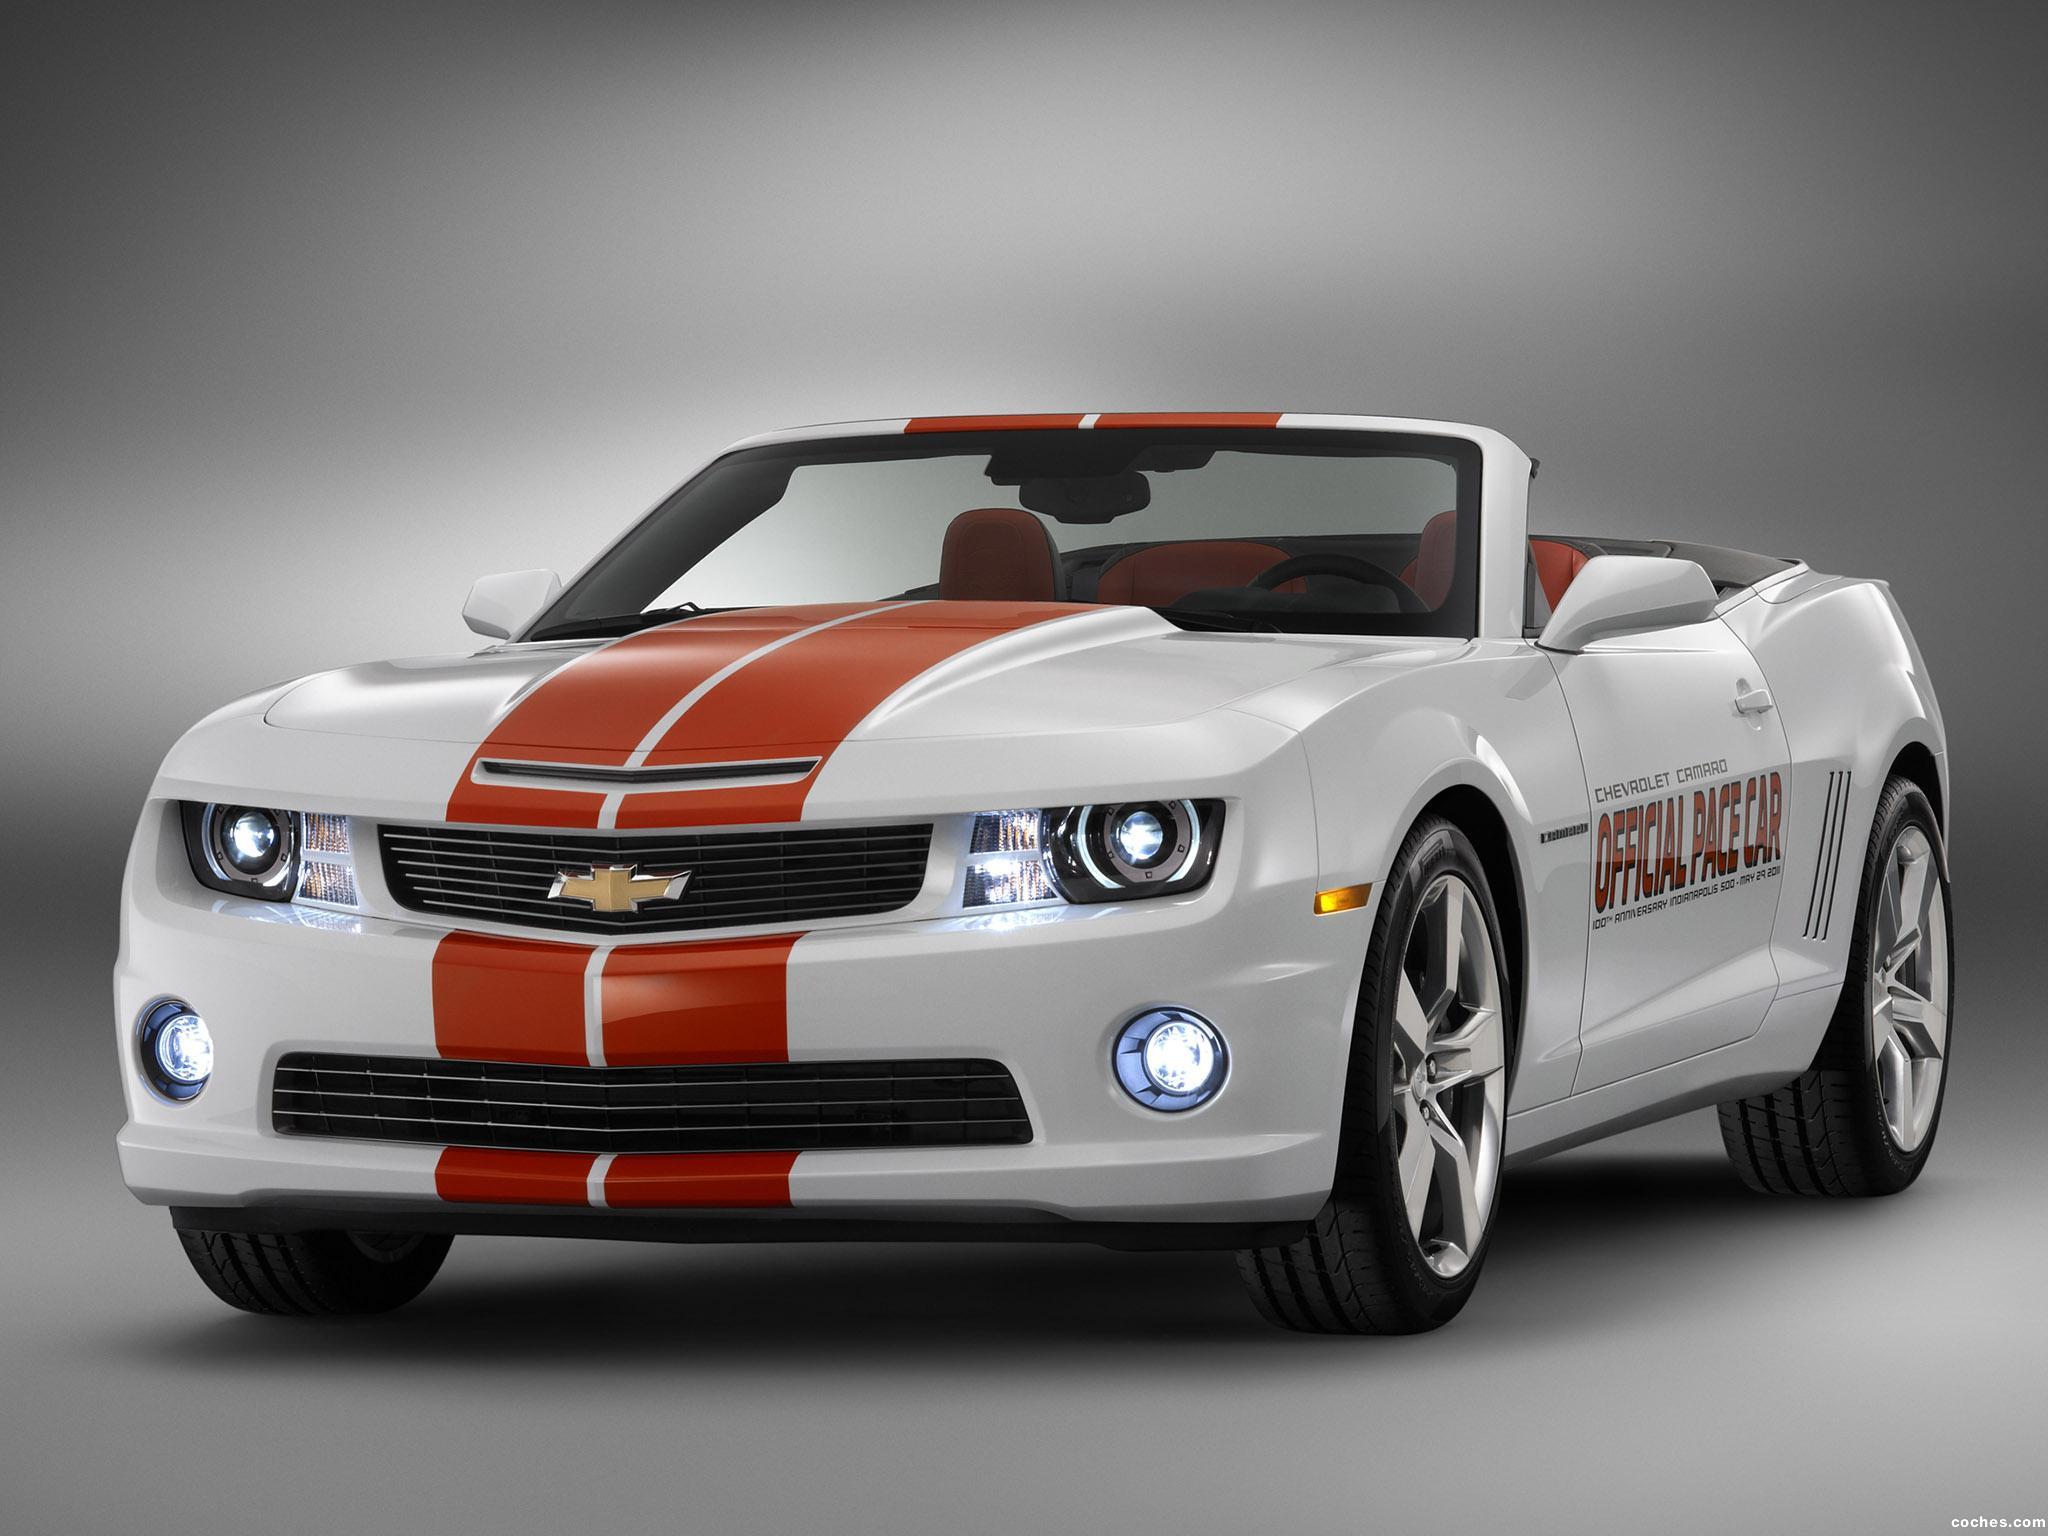 chevrolet_camaro-convertible-indy-500-pace-car-2011_r3